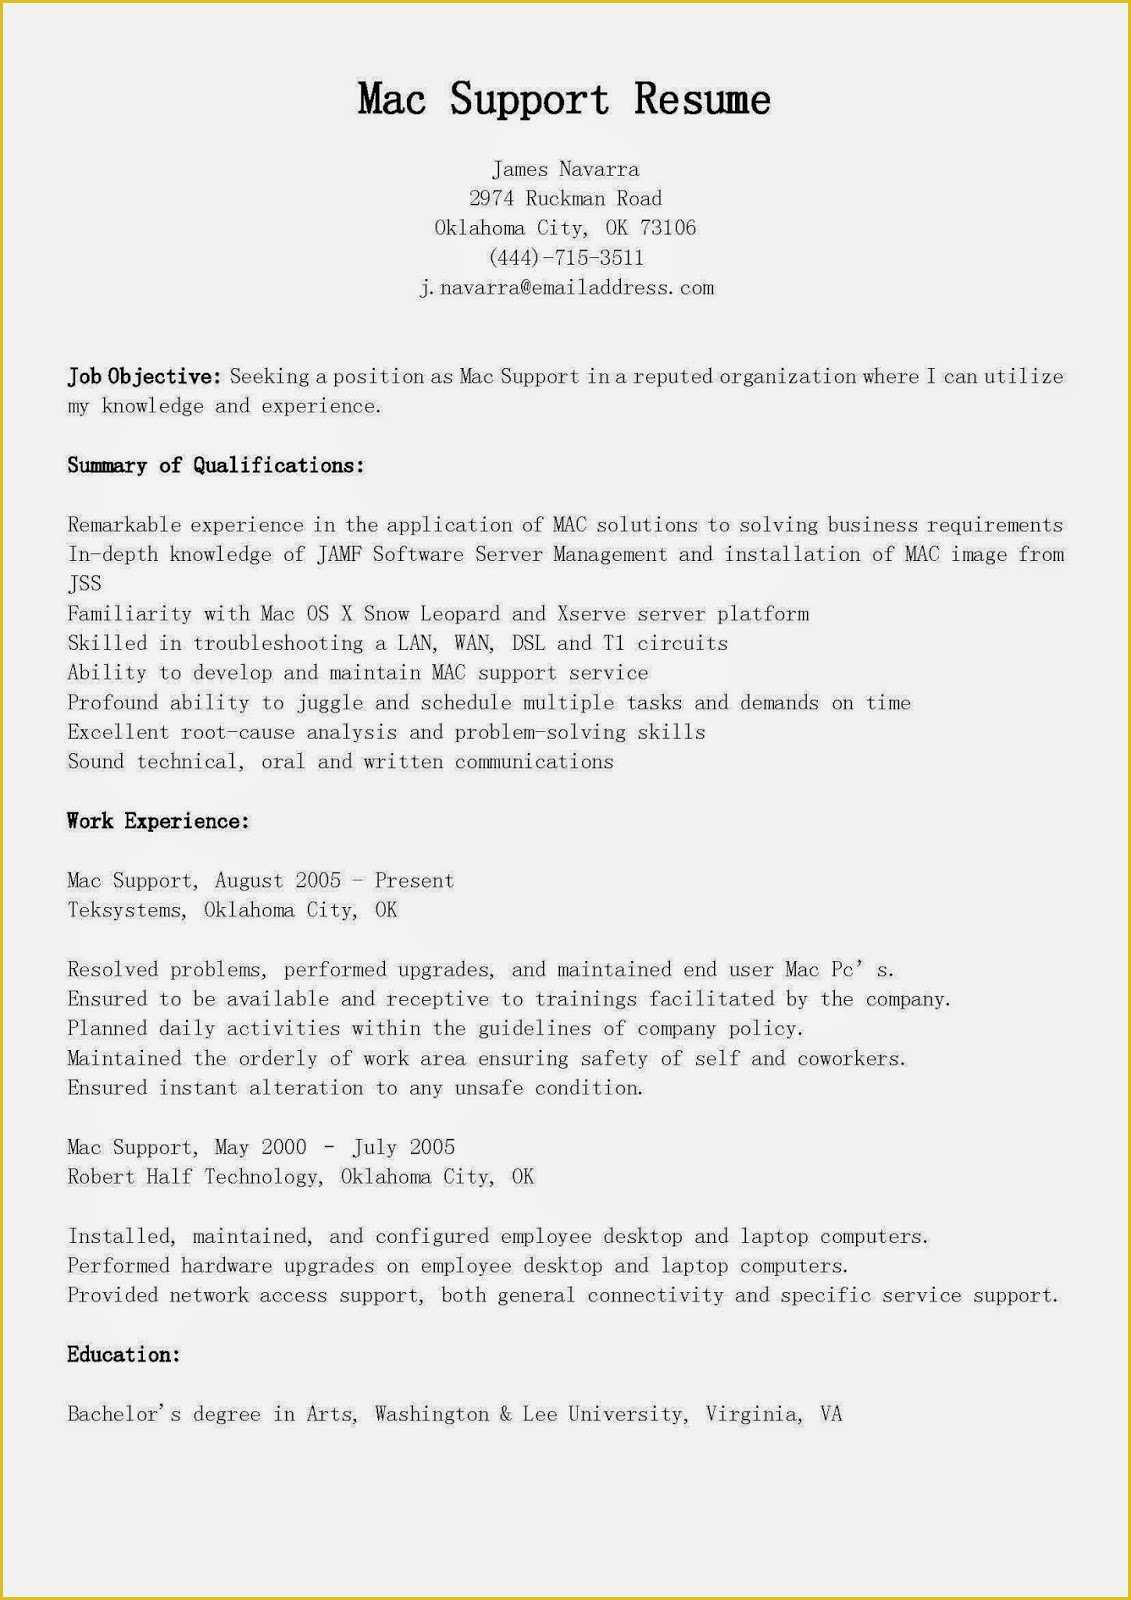 Free Resume Templates for Macbook Pro Of Resume Samples Mac Support Resume Sample